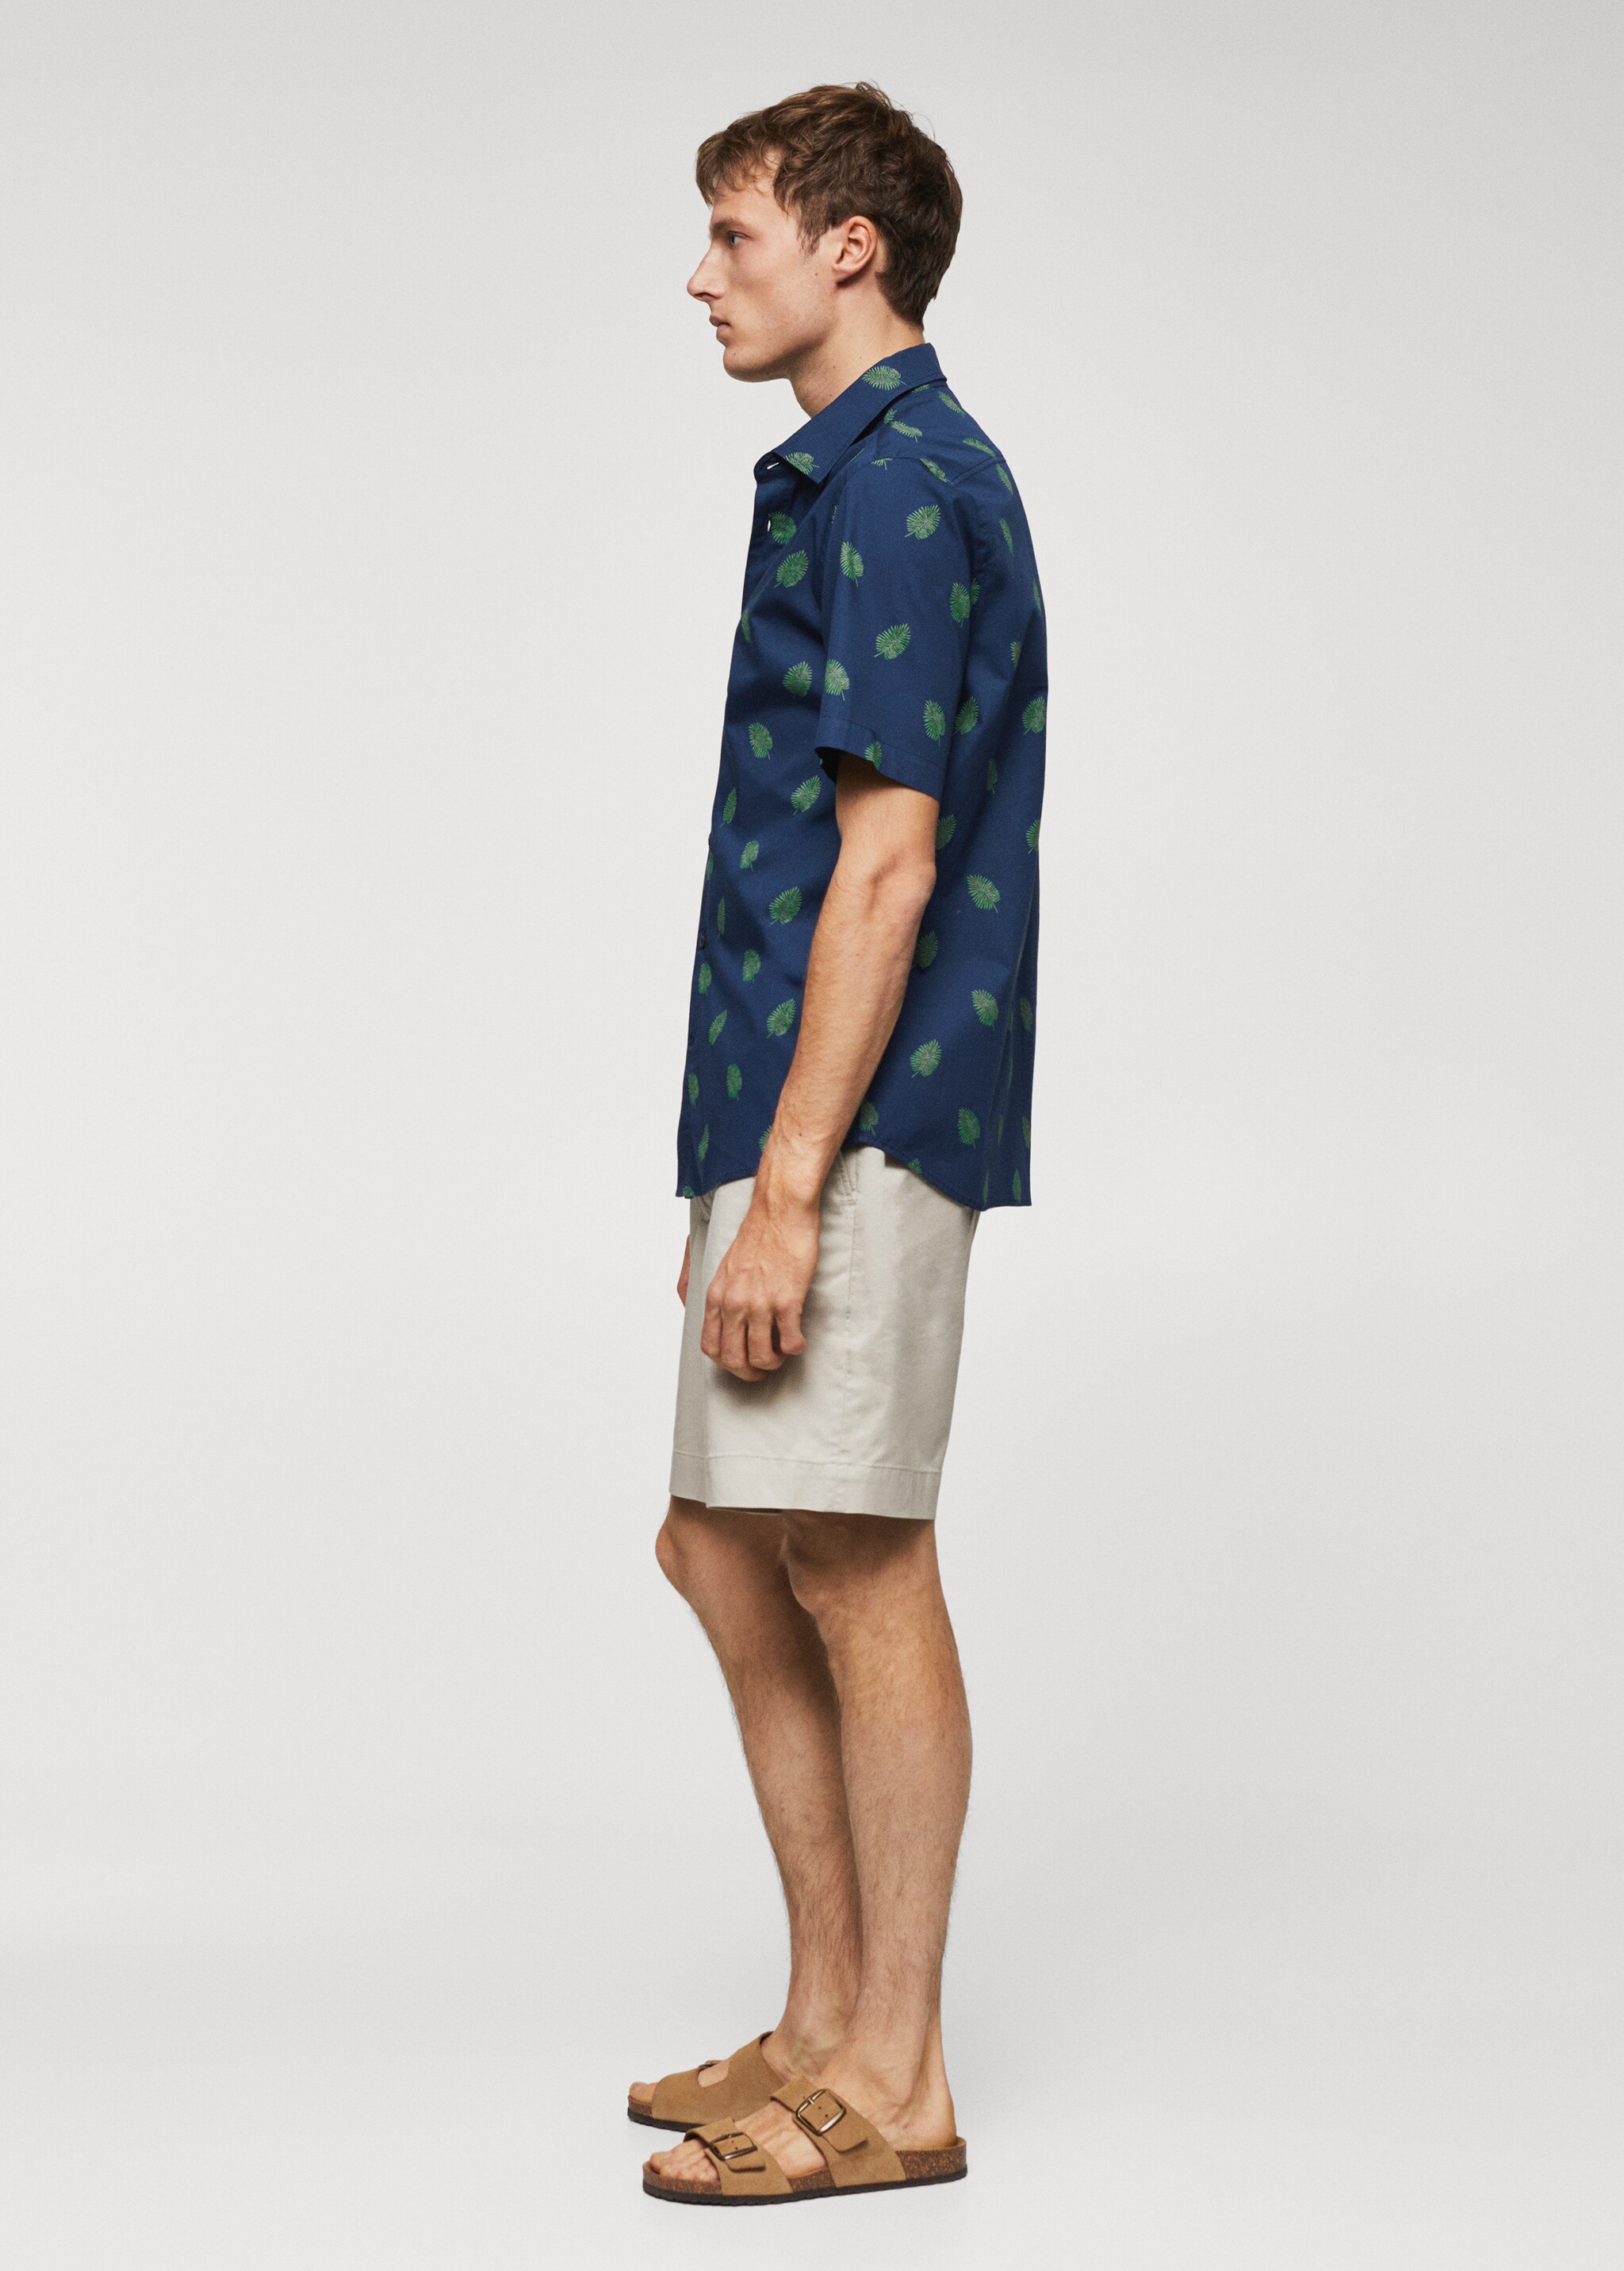 100% cotton short-sleeved printed shirt - Details of the article 2